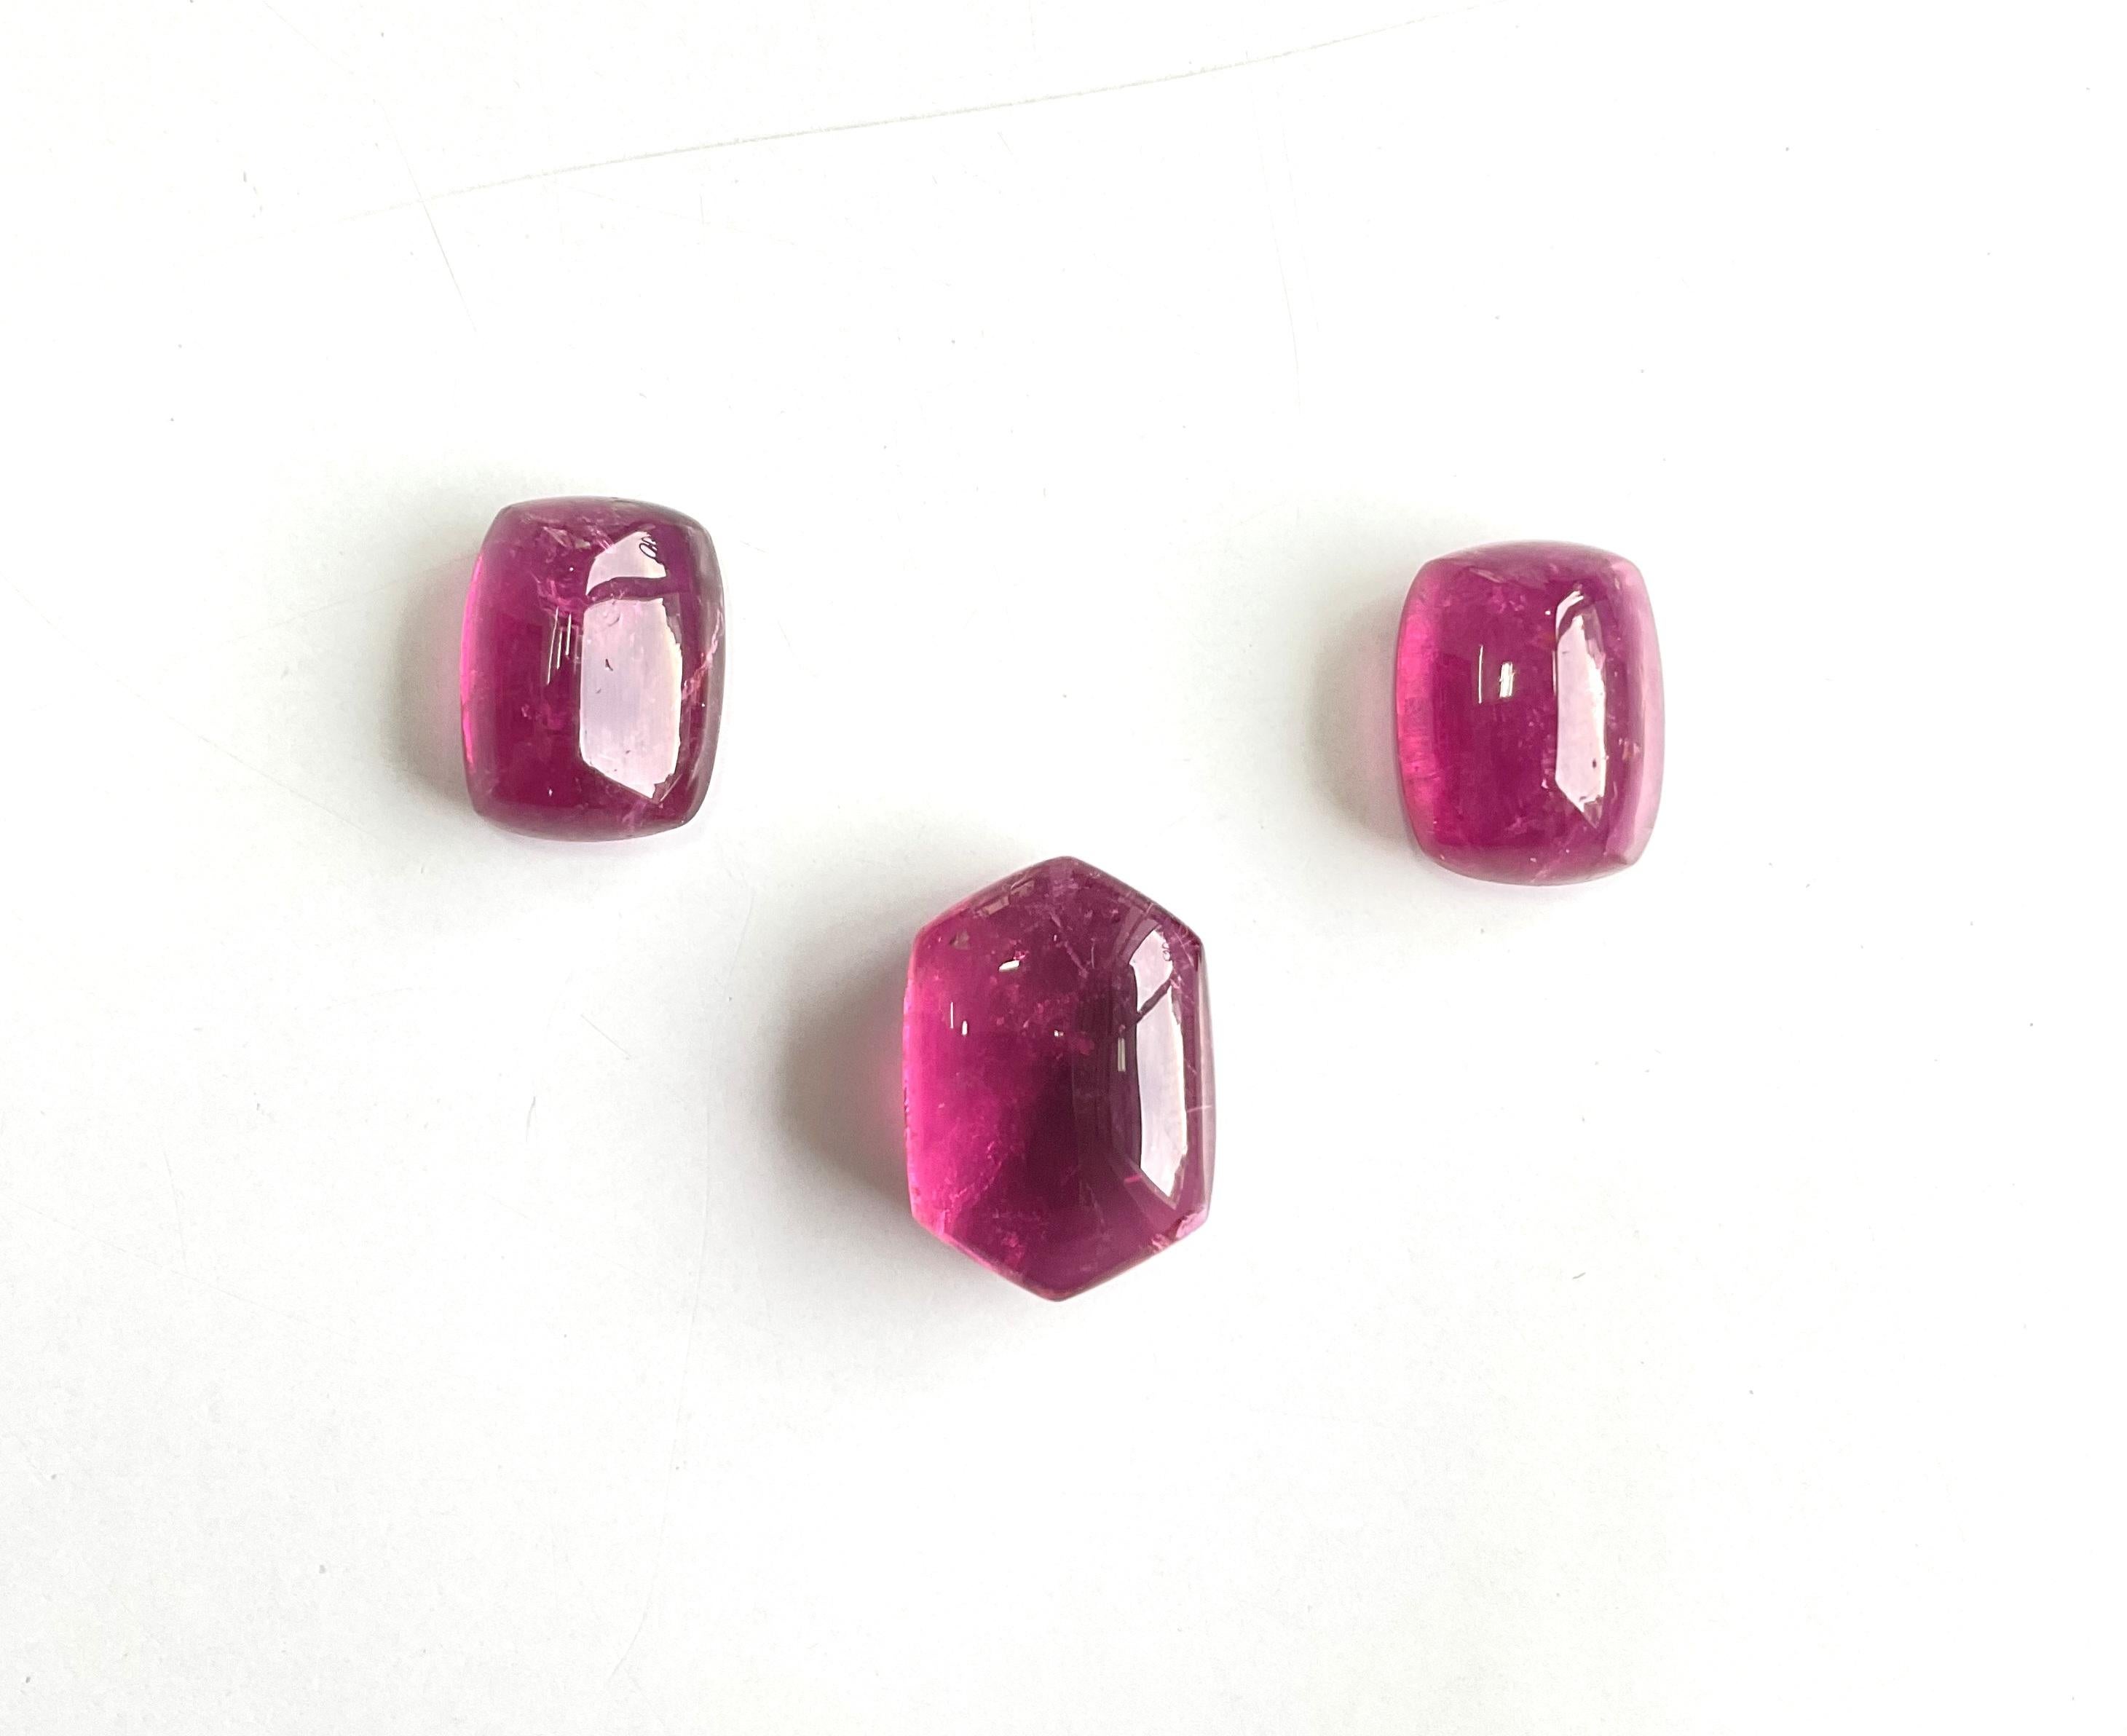 44.85 Carats Rubellite Tourmaline 3 Pieces Top Fine Jewelry Set Natural Gemstone For Sale 2